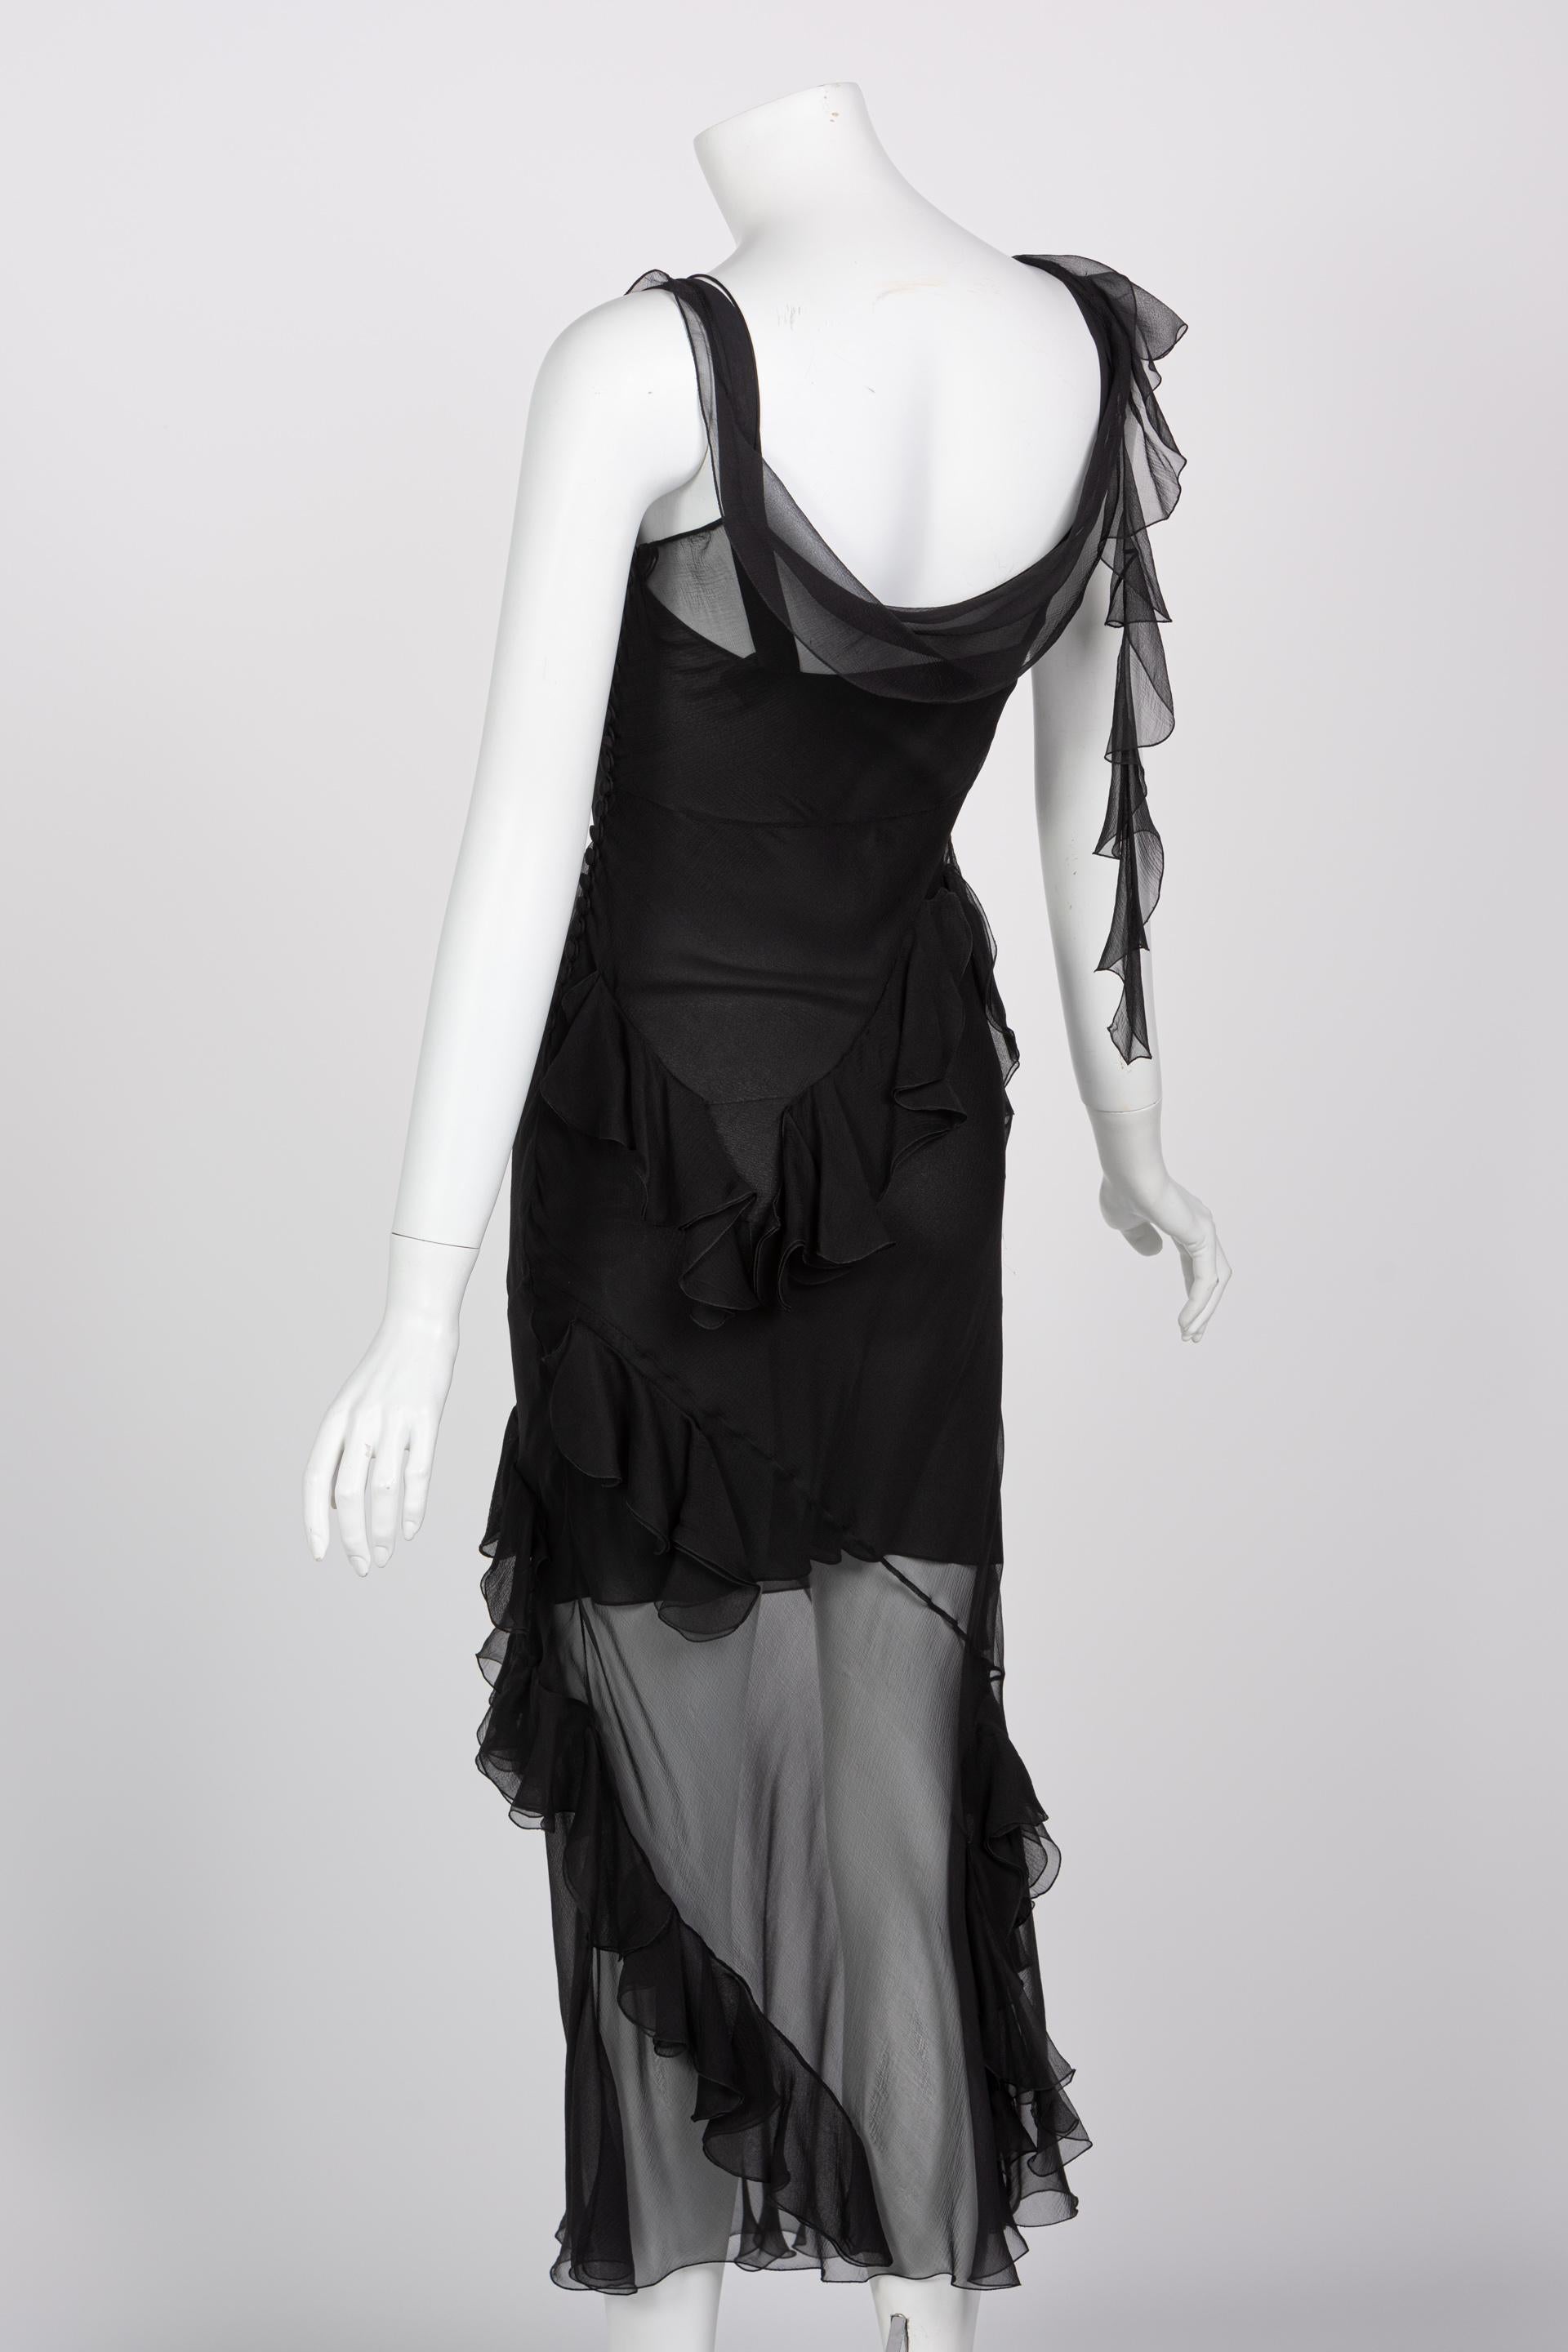 Christian Dior by Galliano Black Sheer Silk Sleeveless Dress In Excellent Condition In Boca Raton, FL